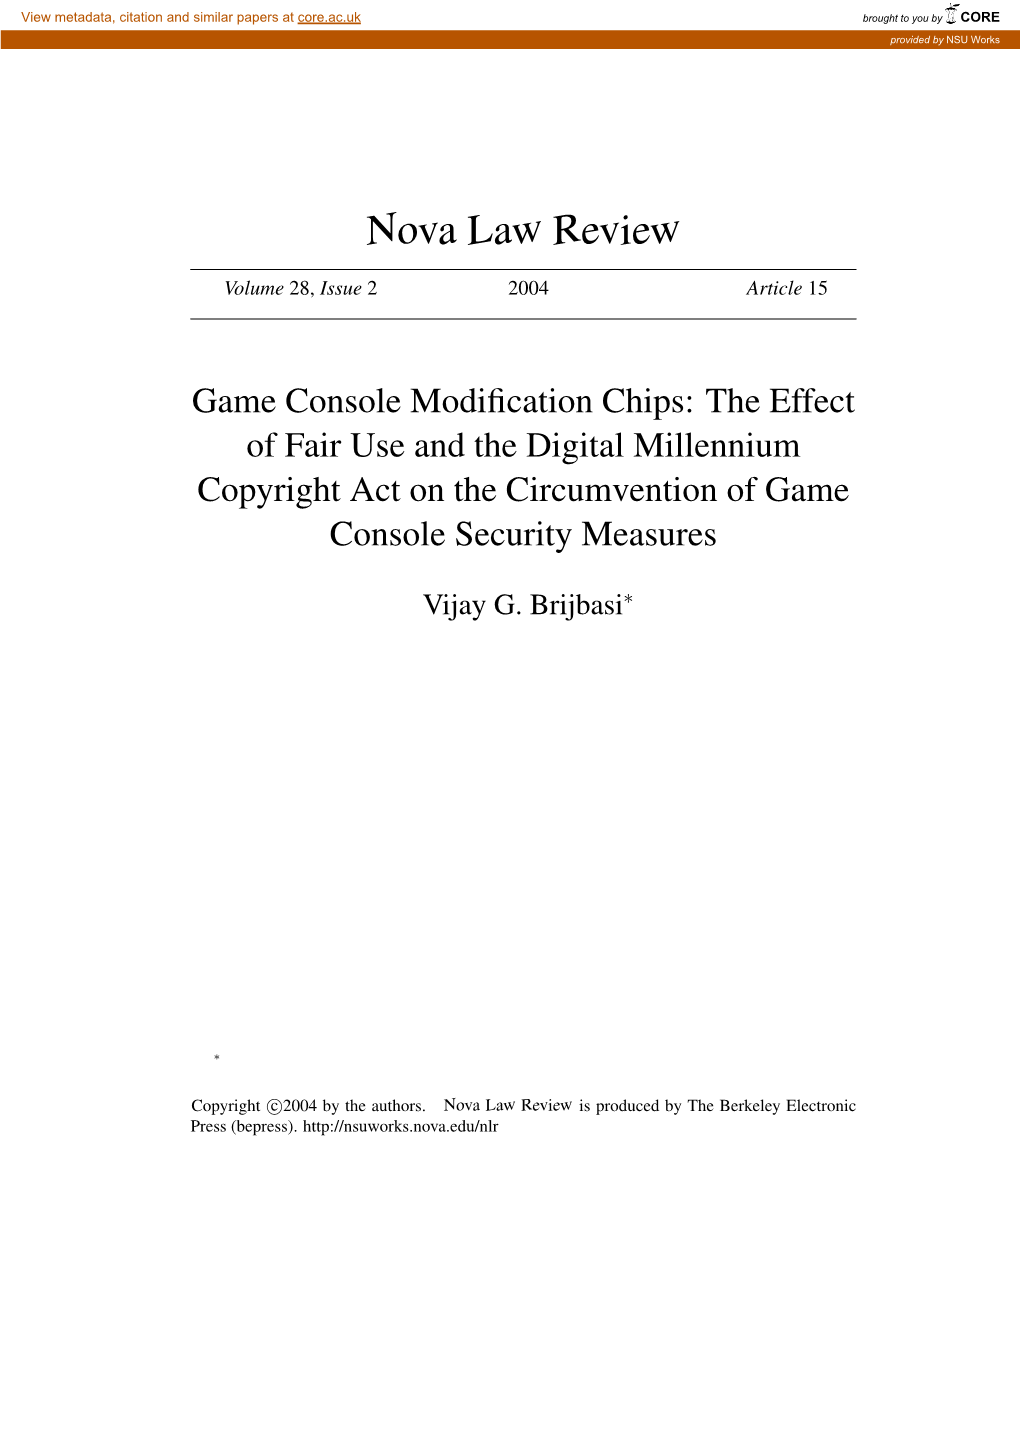 Game Console Modification Chips: the Effect of Fair Use and the D